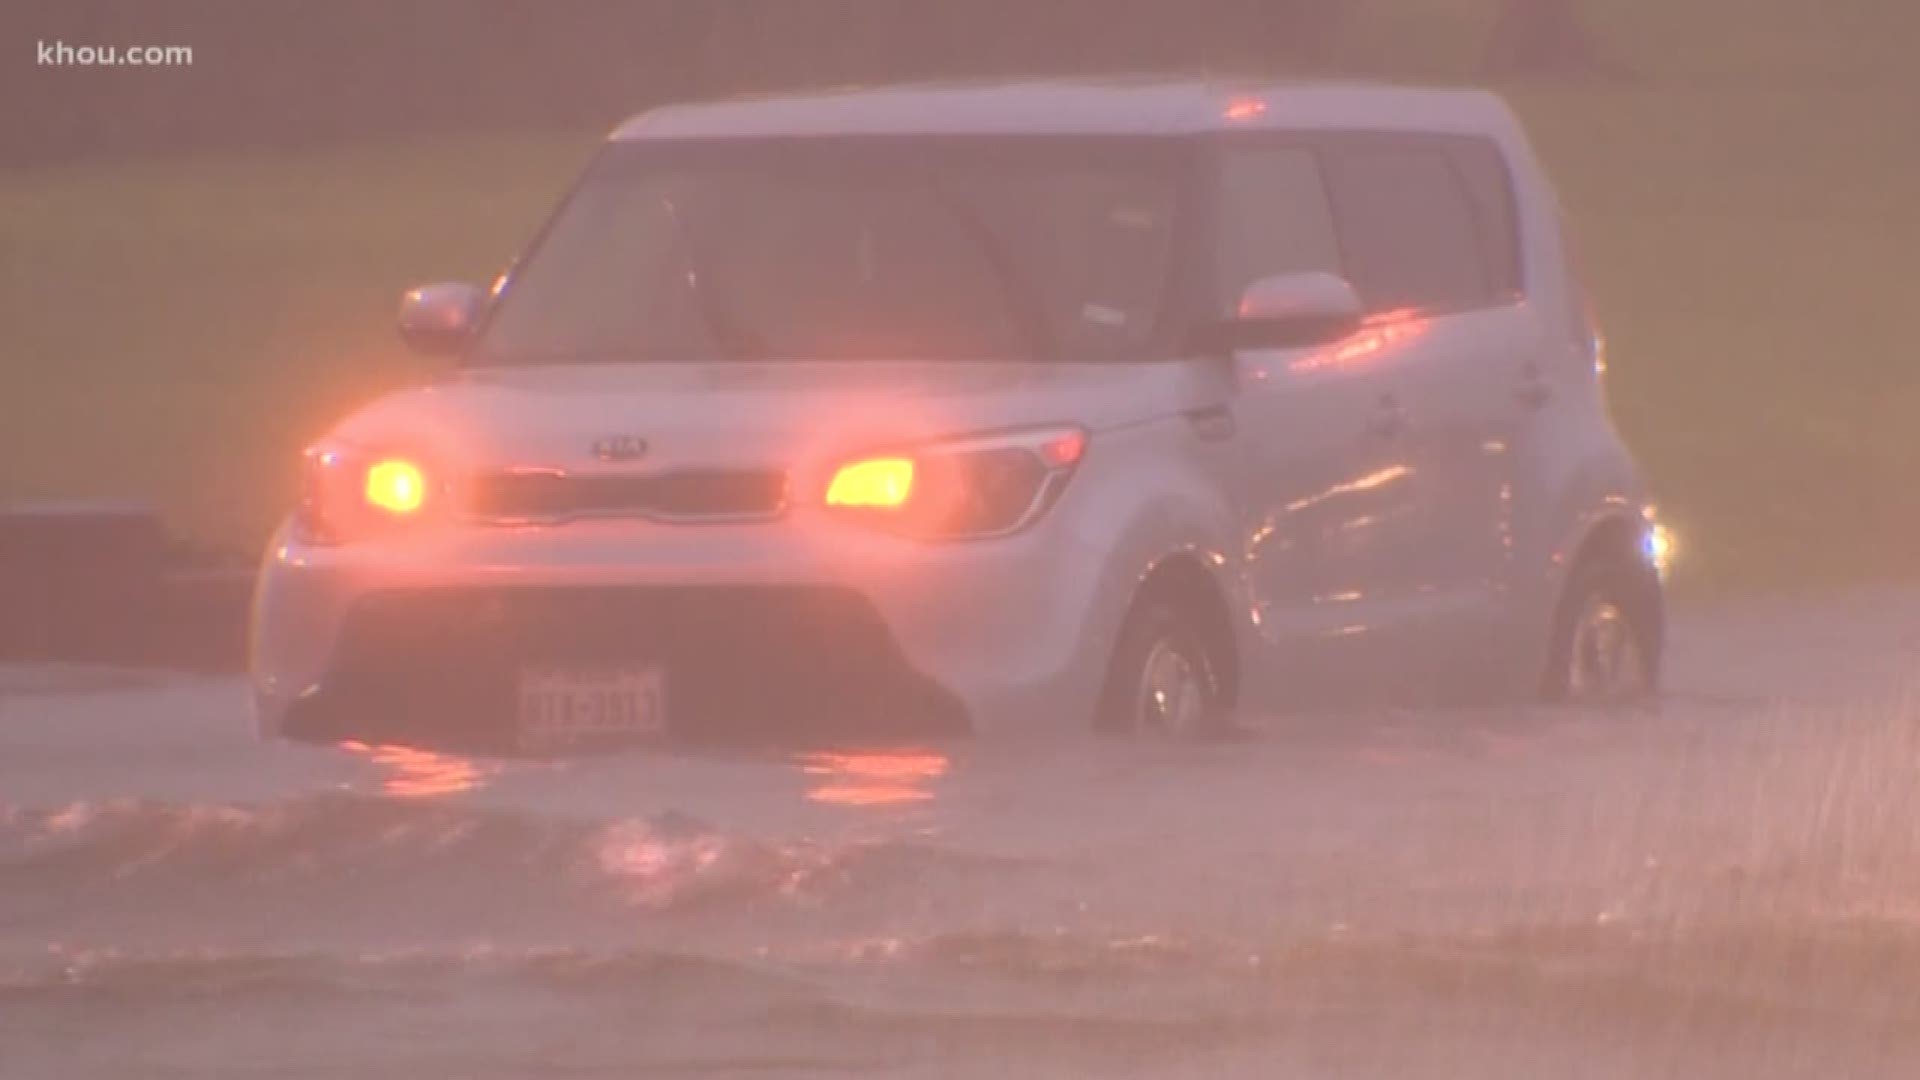 All main roads in Sugar Land are impassable because of Tuesday's severe weather. Some areas received up to 12 inches of rain.